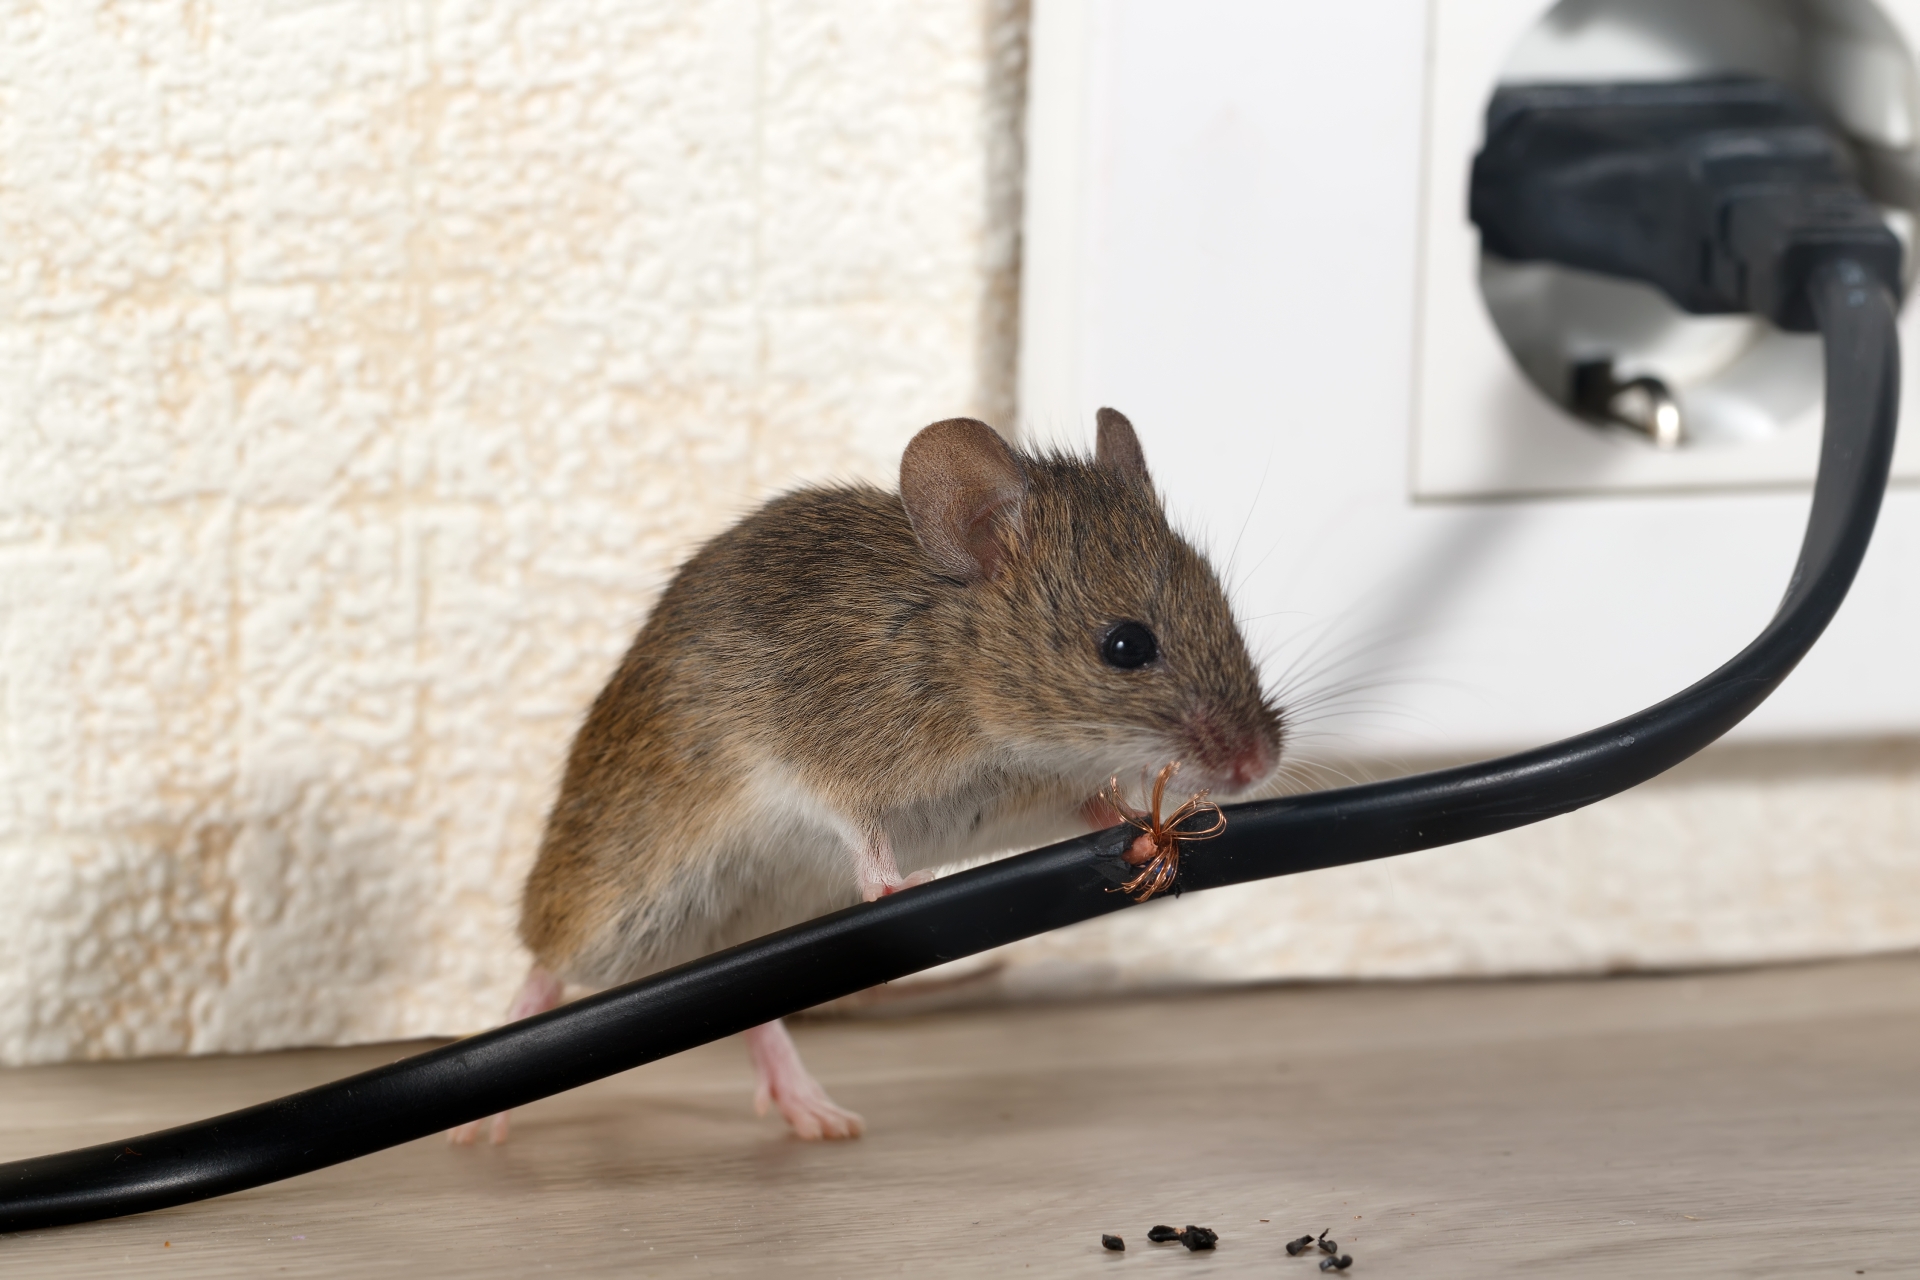 Mice Infestation, Pest Control in Mayfair, Marylebone, W1. Call Now 020 8166 9746